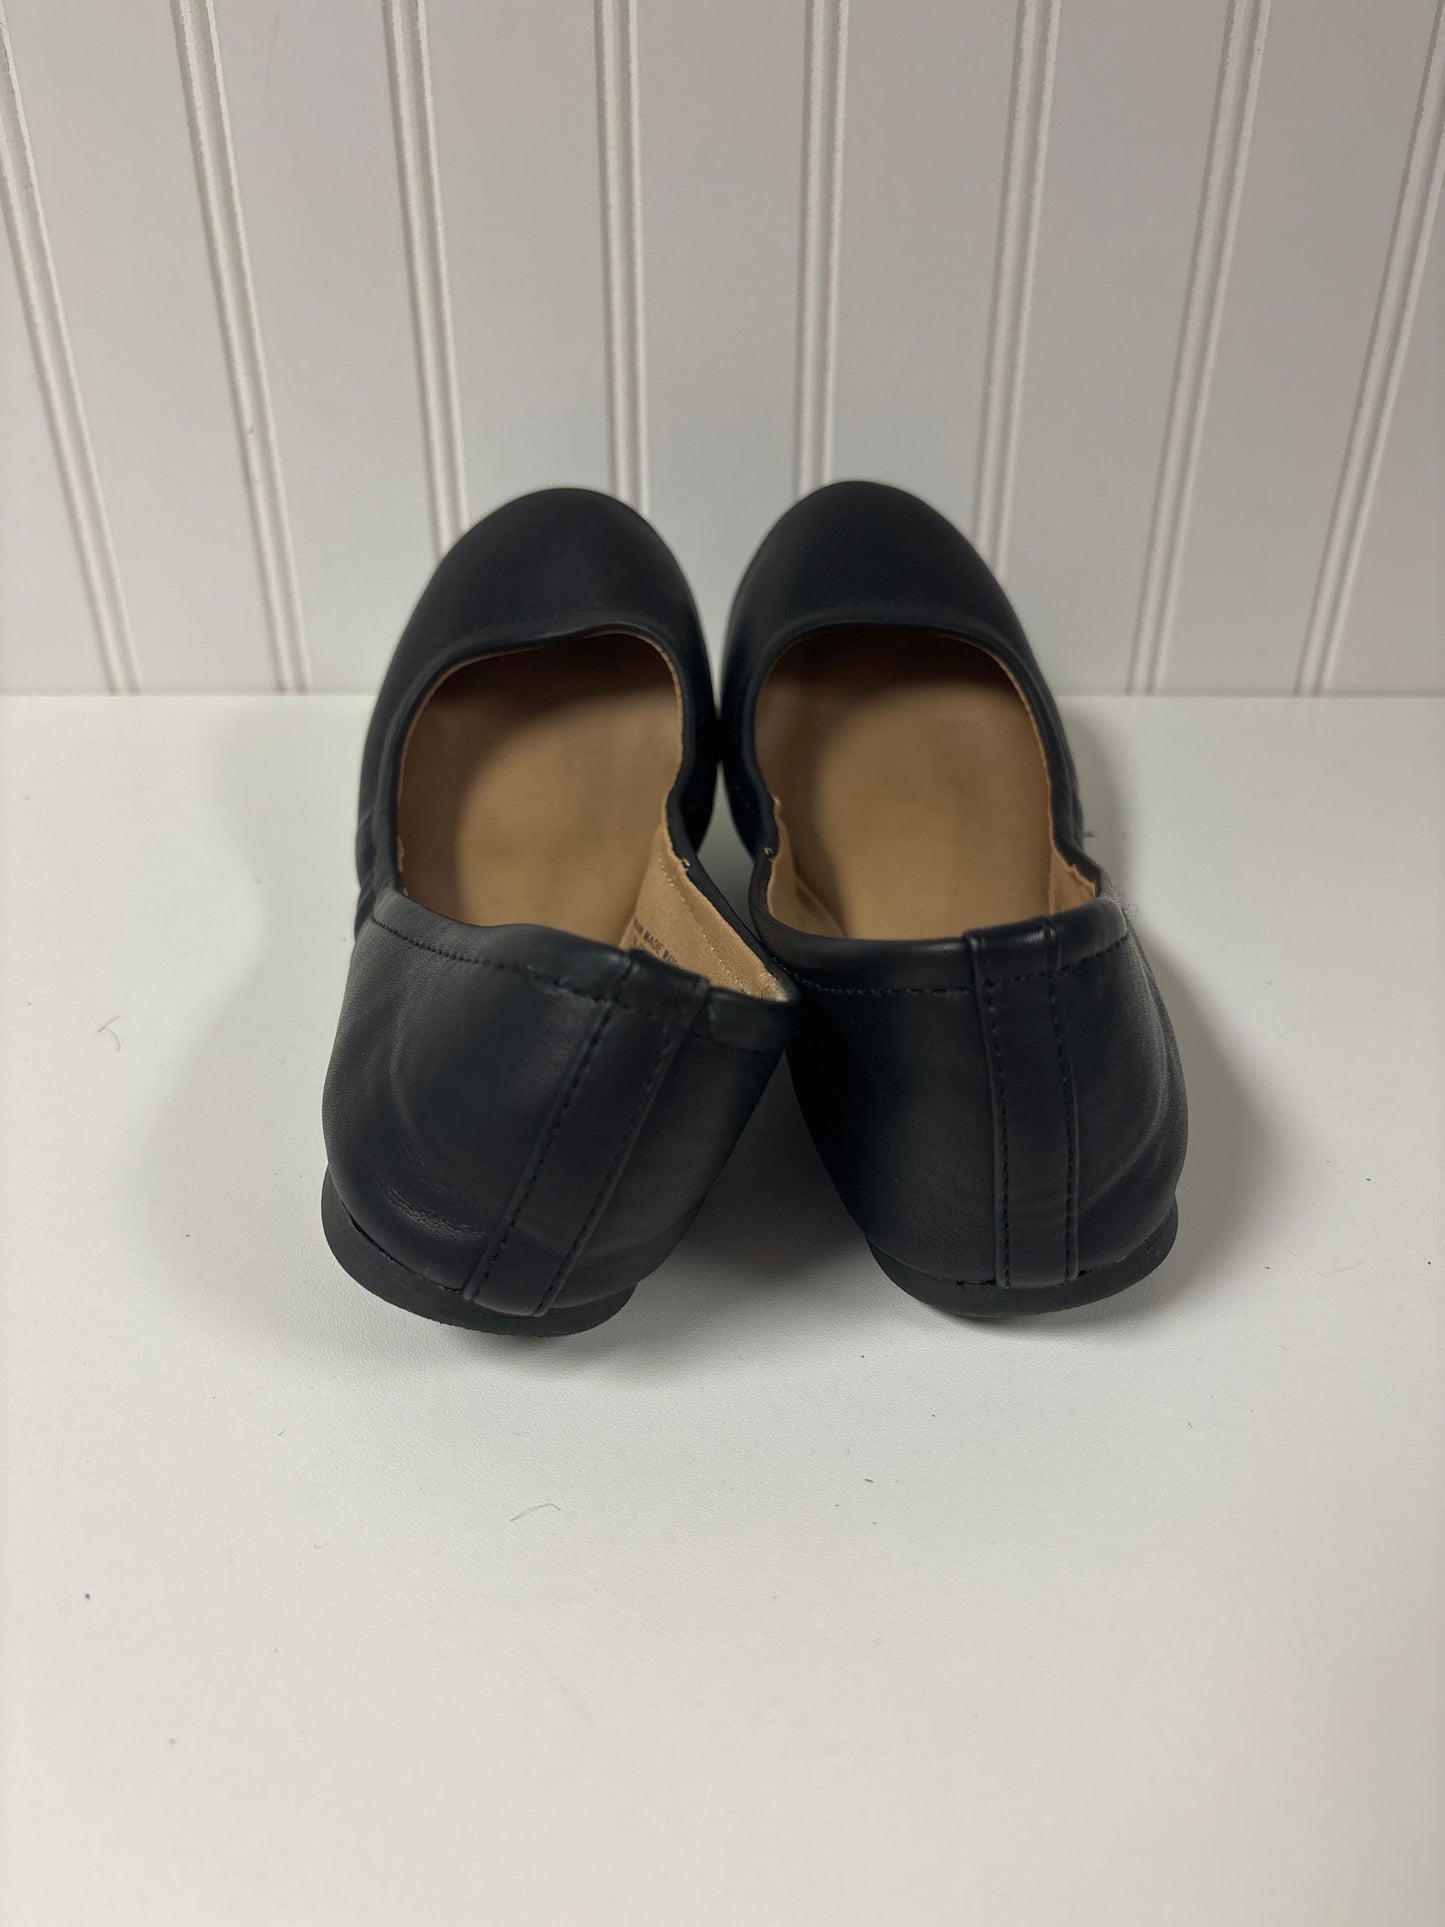 Shoes Flats By Mossimo  Size: 7